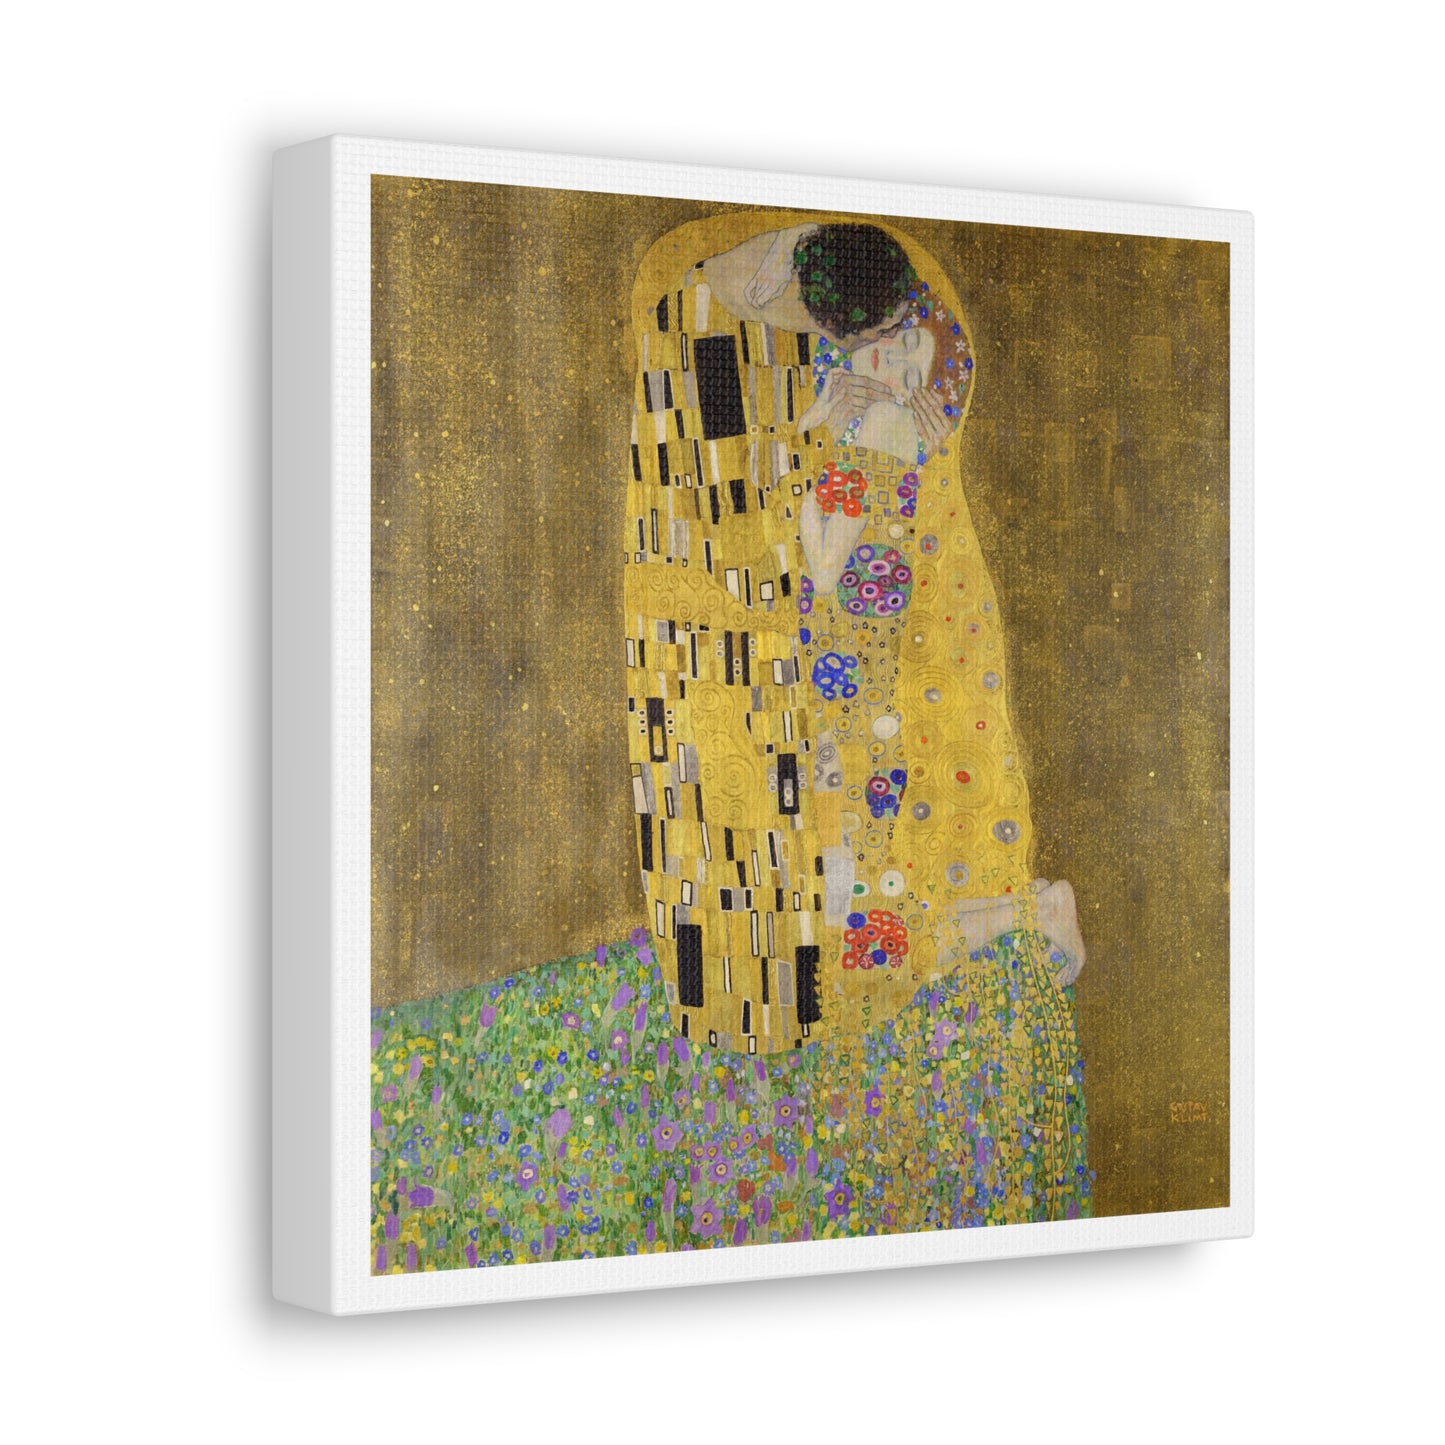 The Kiss (1907–1908) by Gustav Klimt, from the Original, Art Print on Canvas